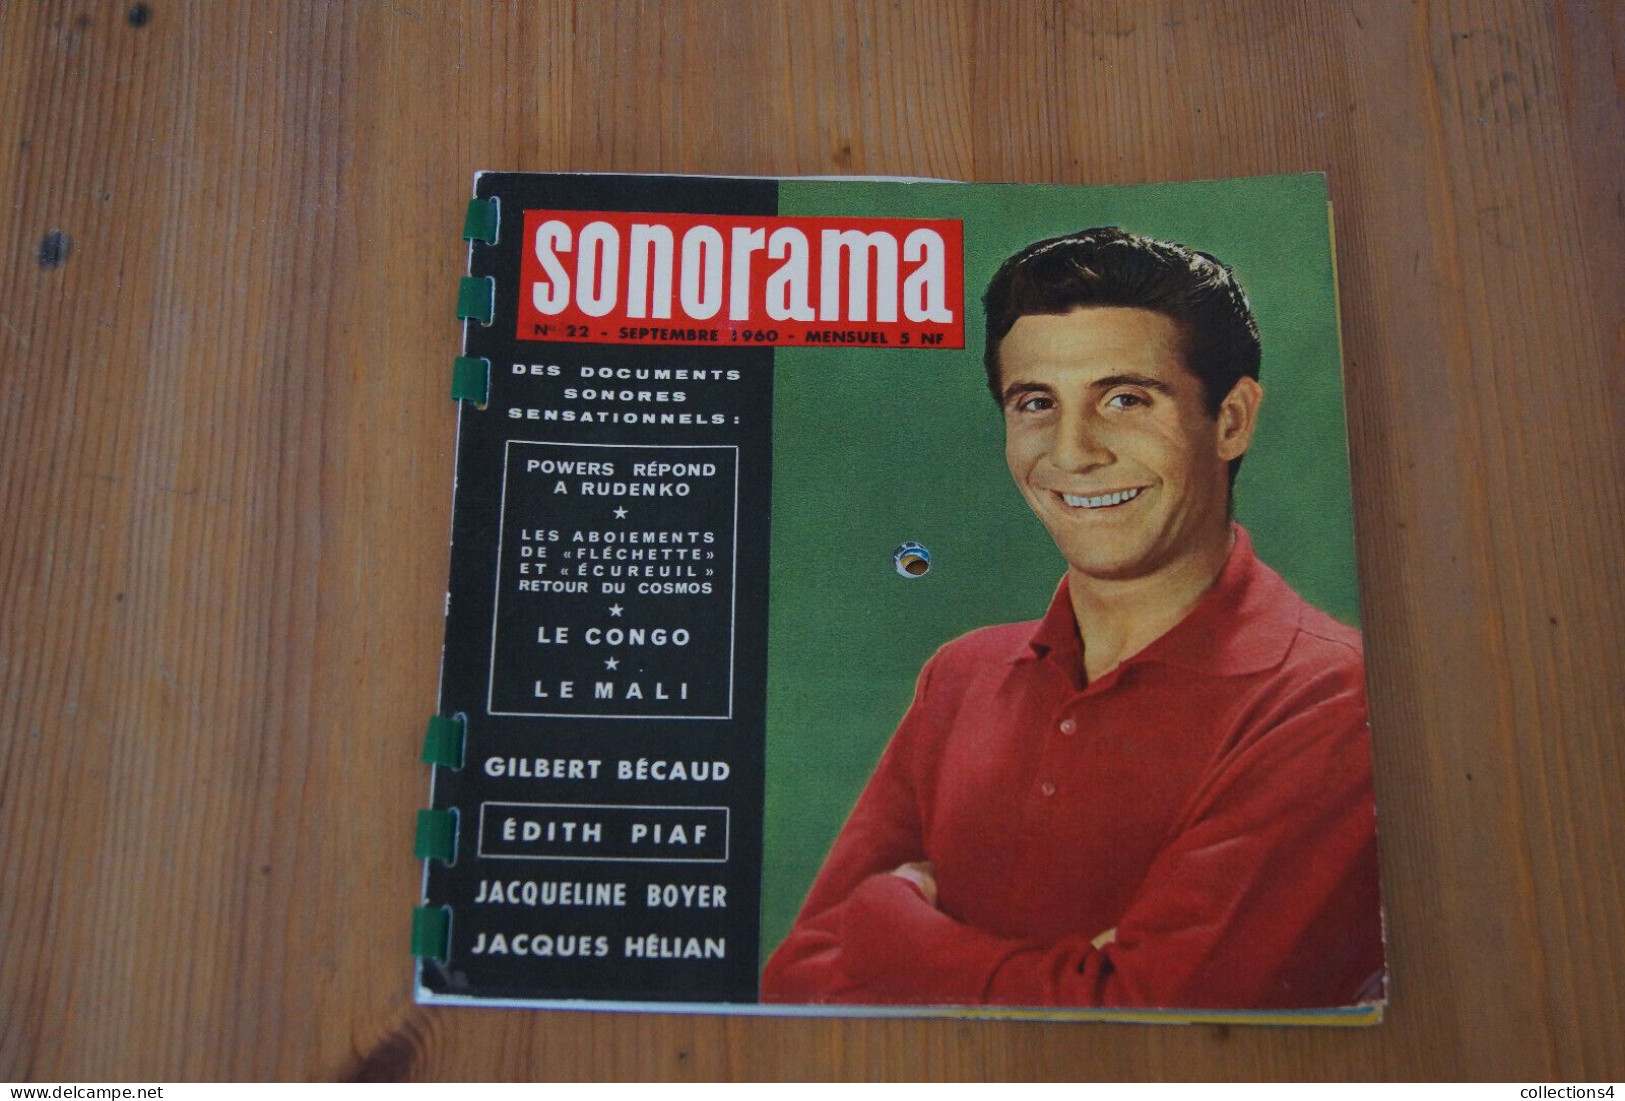 SONORAMA N° 22 SEPT 1960 G BECAUD EDITH PIAF JACQUELINE BOYER JACQUES HELIAN ET + - Formati Speciali